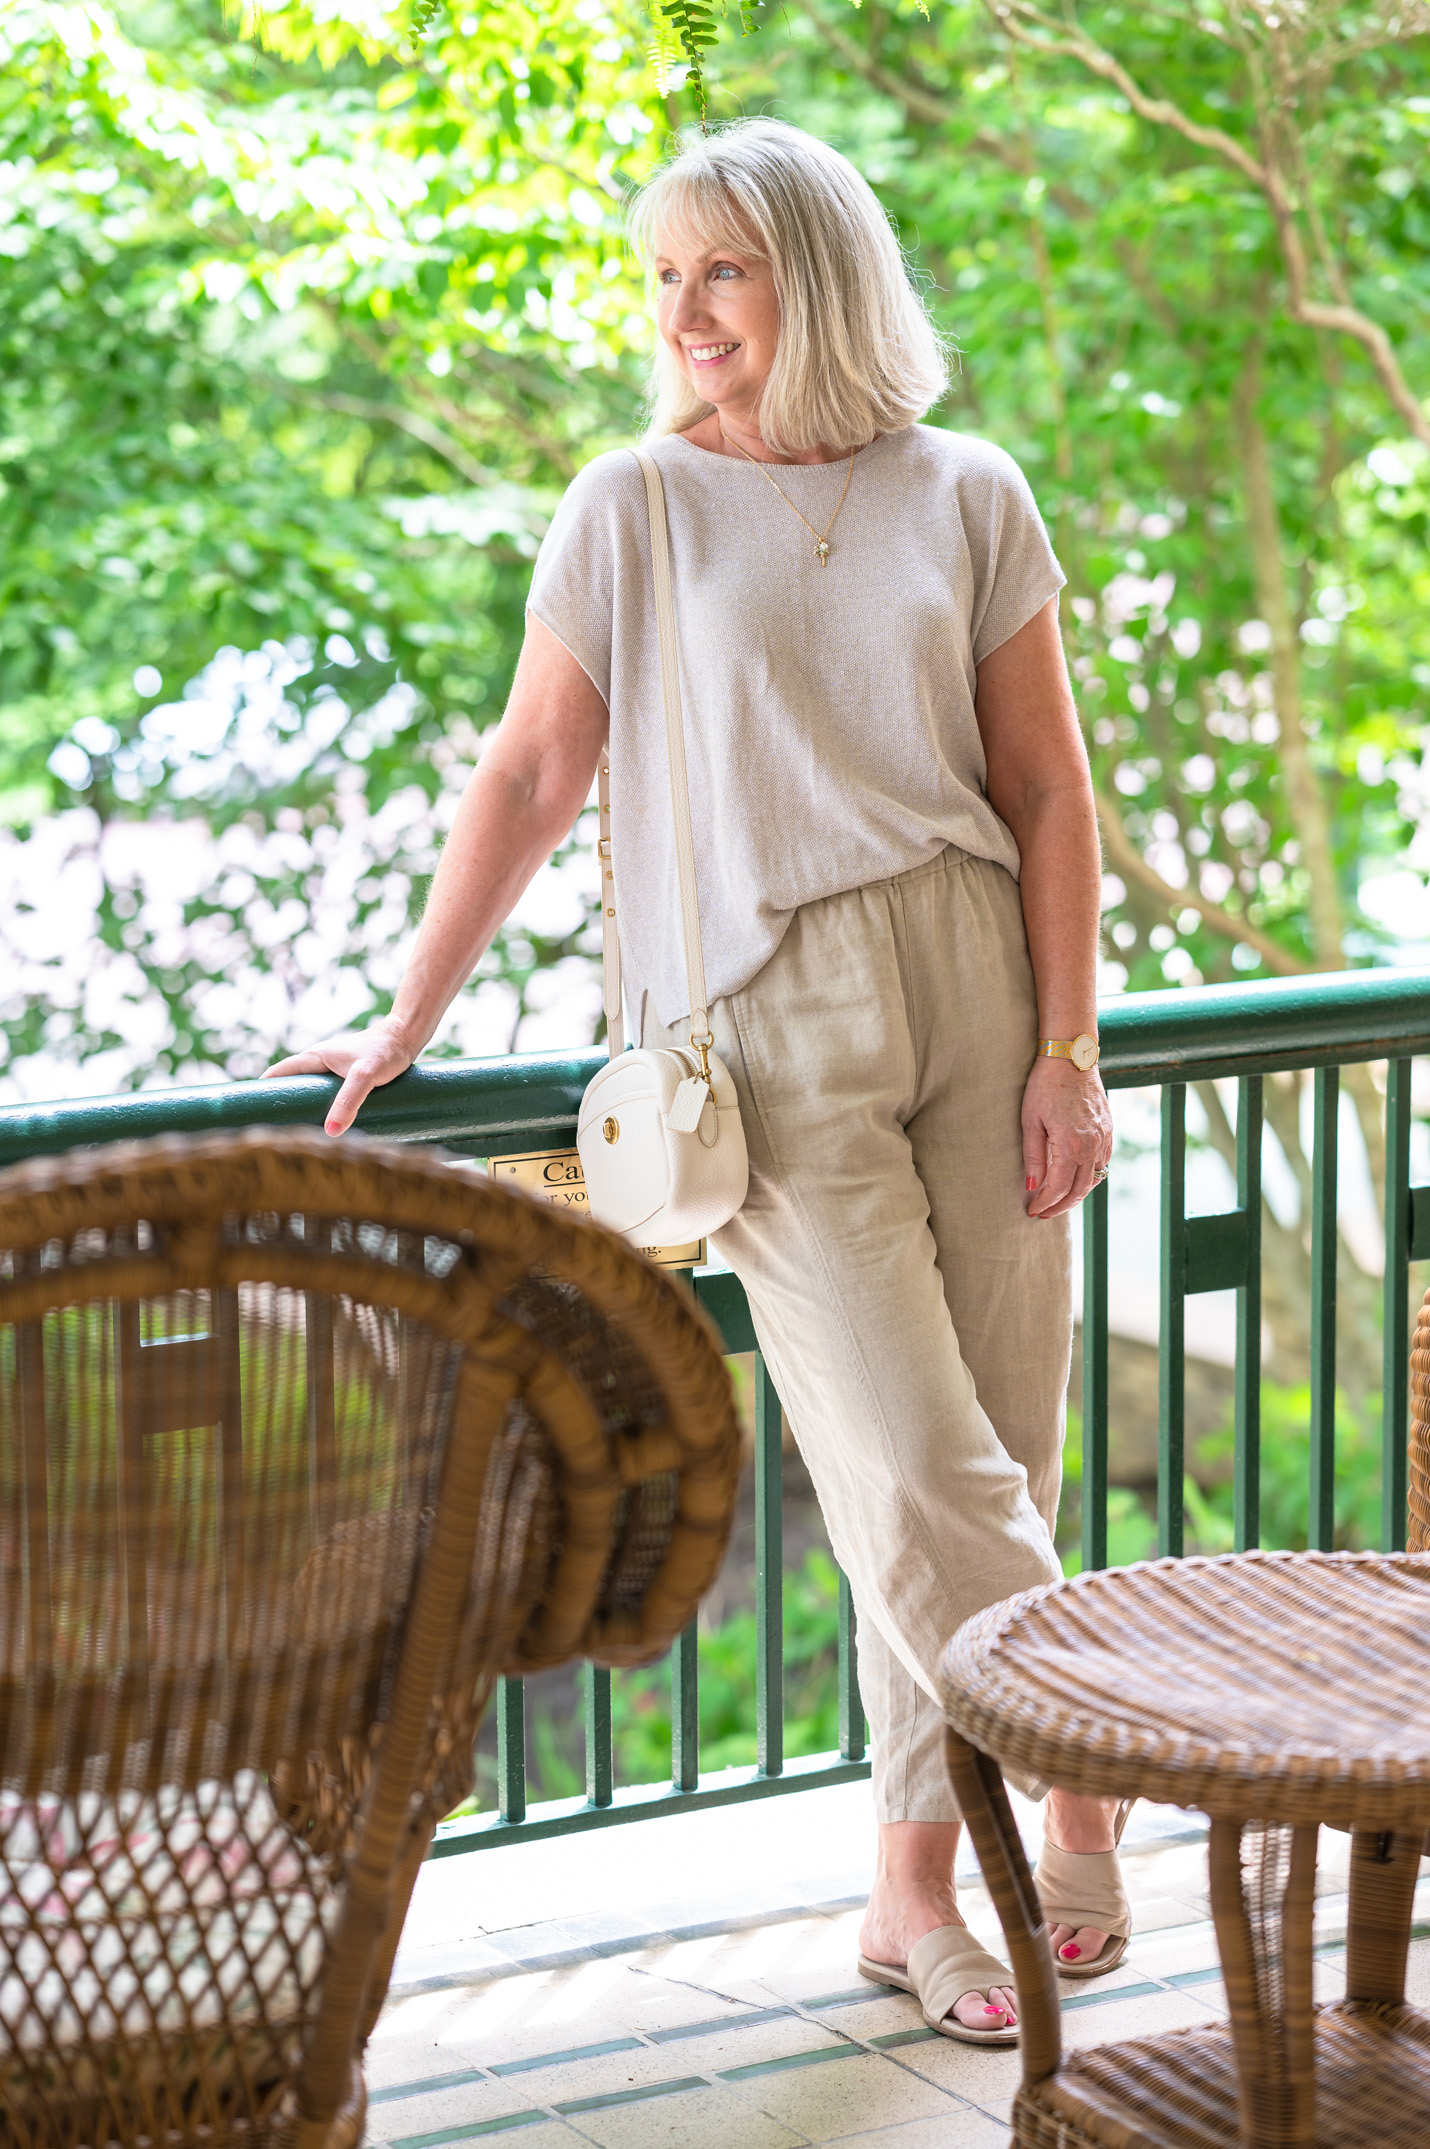 Coastal Grandmother outfit in muted tones